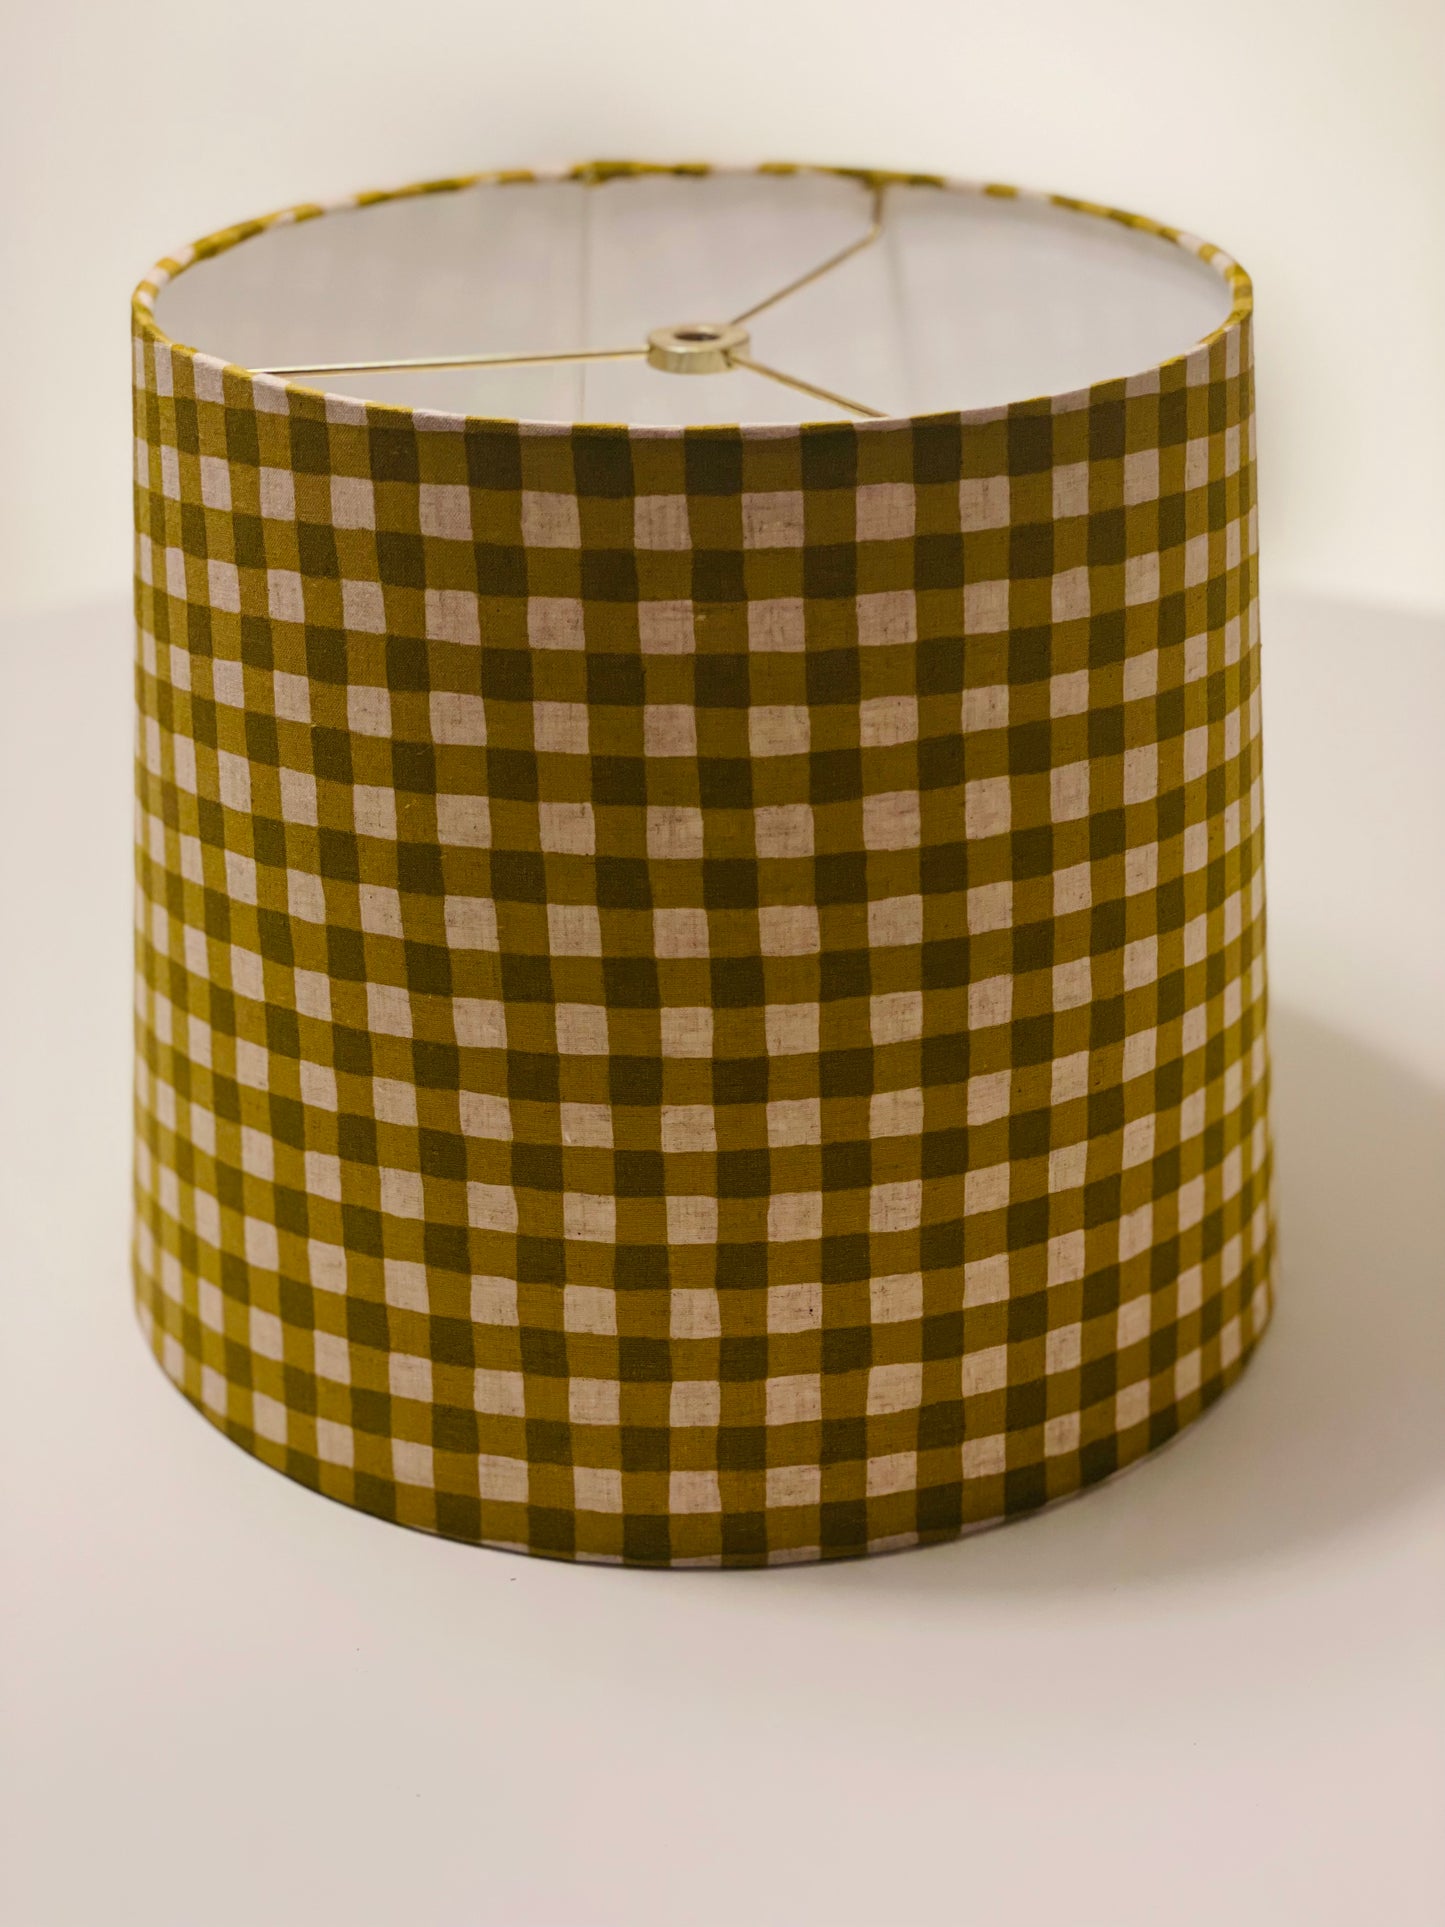 Medium Empire Lampshade. Yellow-Green Gingham Cotton-Linen from Japan.